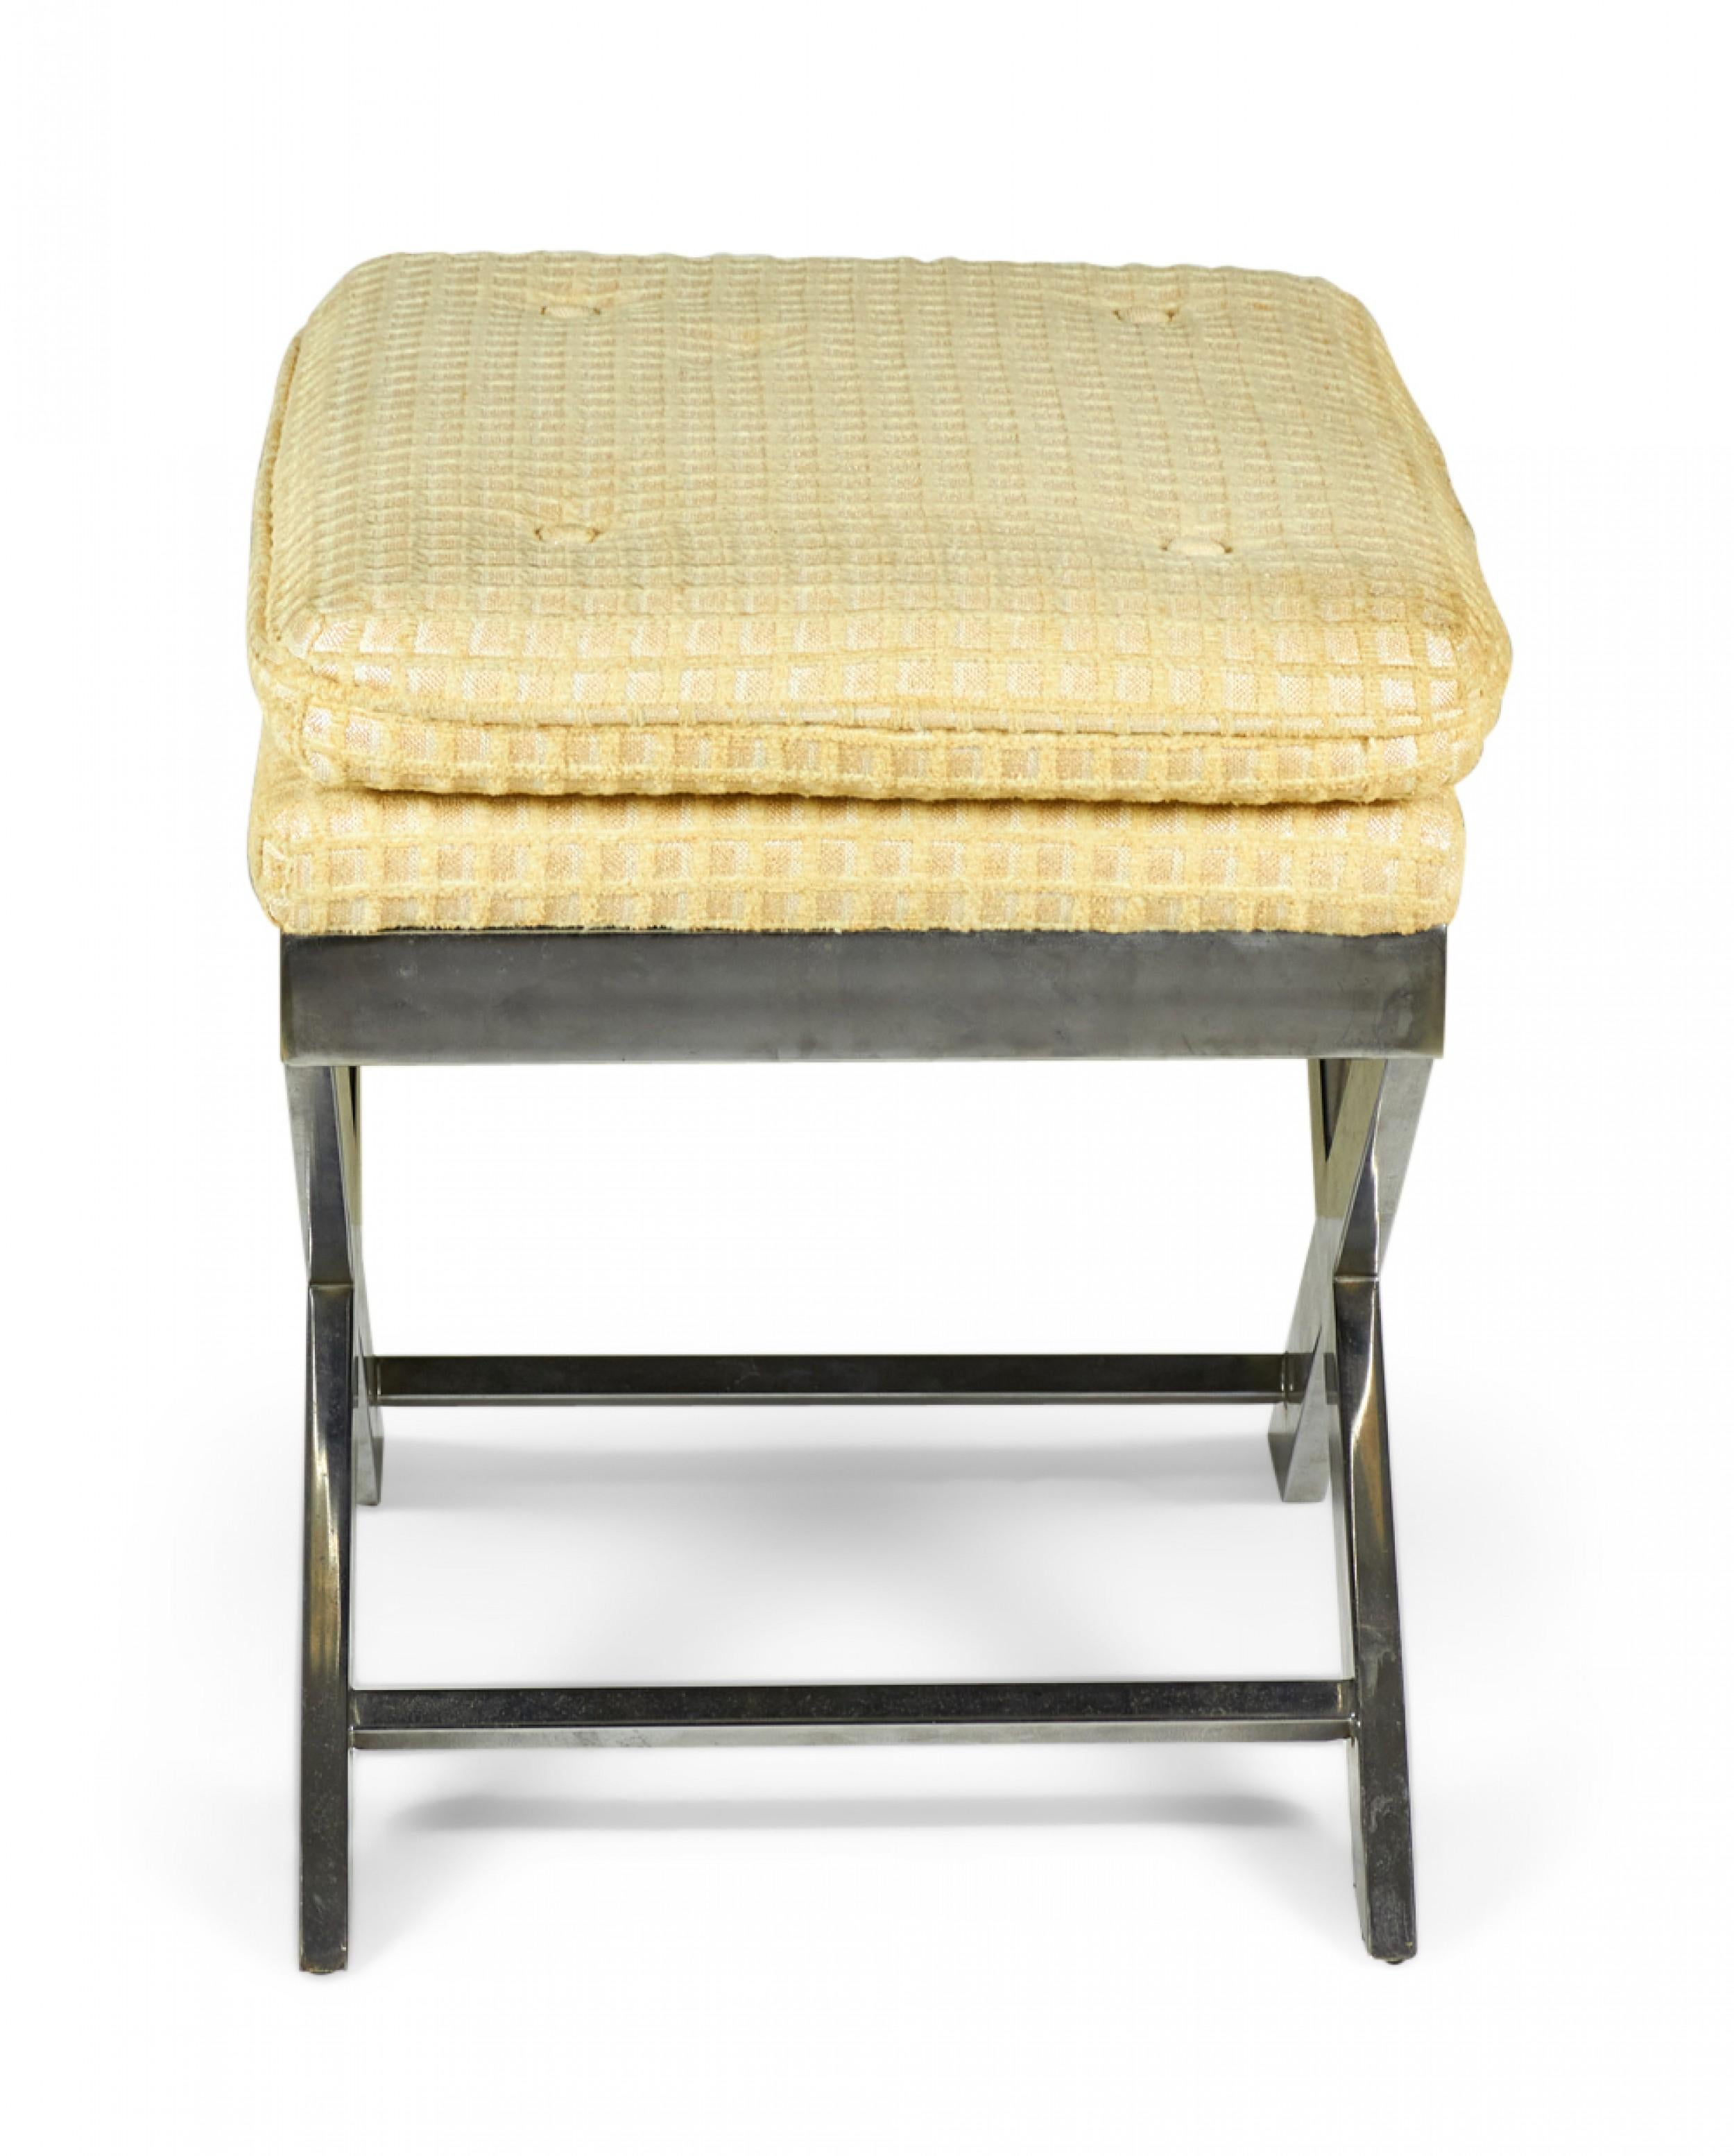 Pair of Italian mid-century (circa 1970) upholstered stools / benches with beige and yellow waffle-patterned upholstered seats atop x-shaped chrome bases. (WEIMAN-WARREN) (PRICED AS PAIR)